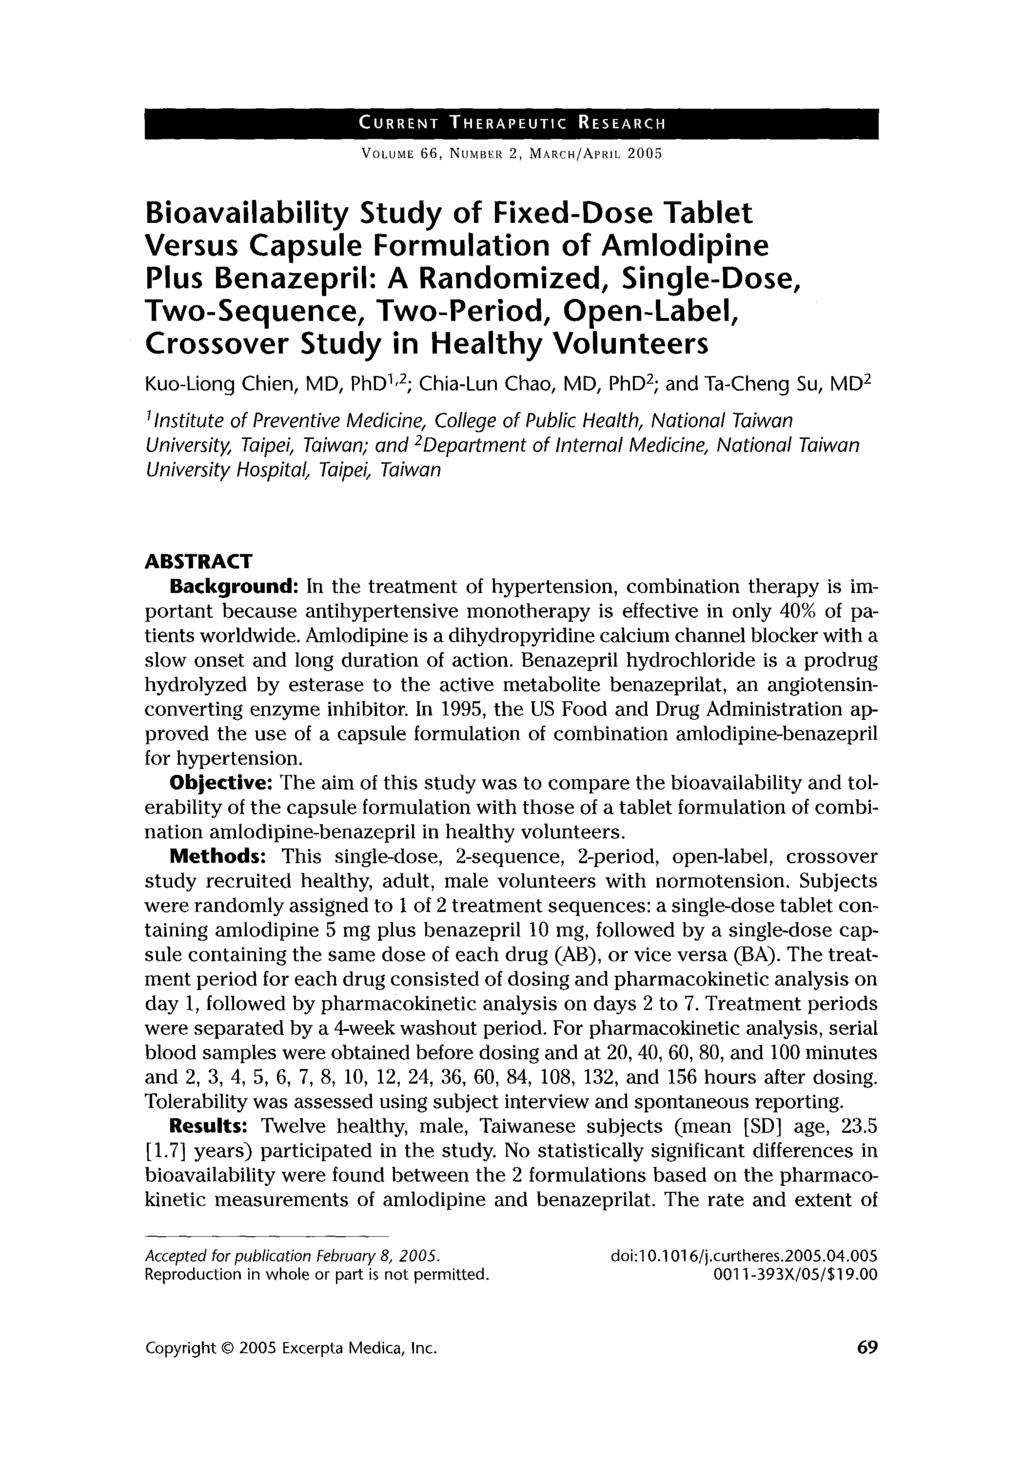 RENT THERAPEUTIC RESEARC~ VOLUME 66, NUMBER 2, MARcH/APRIL 2005 Bioavailability Study of Fixed-Dose Tablet Versus Capsule Formulation of Amlodipine Plus Benazepril: A Randomized, Single-Dose,